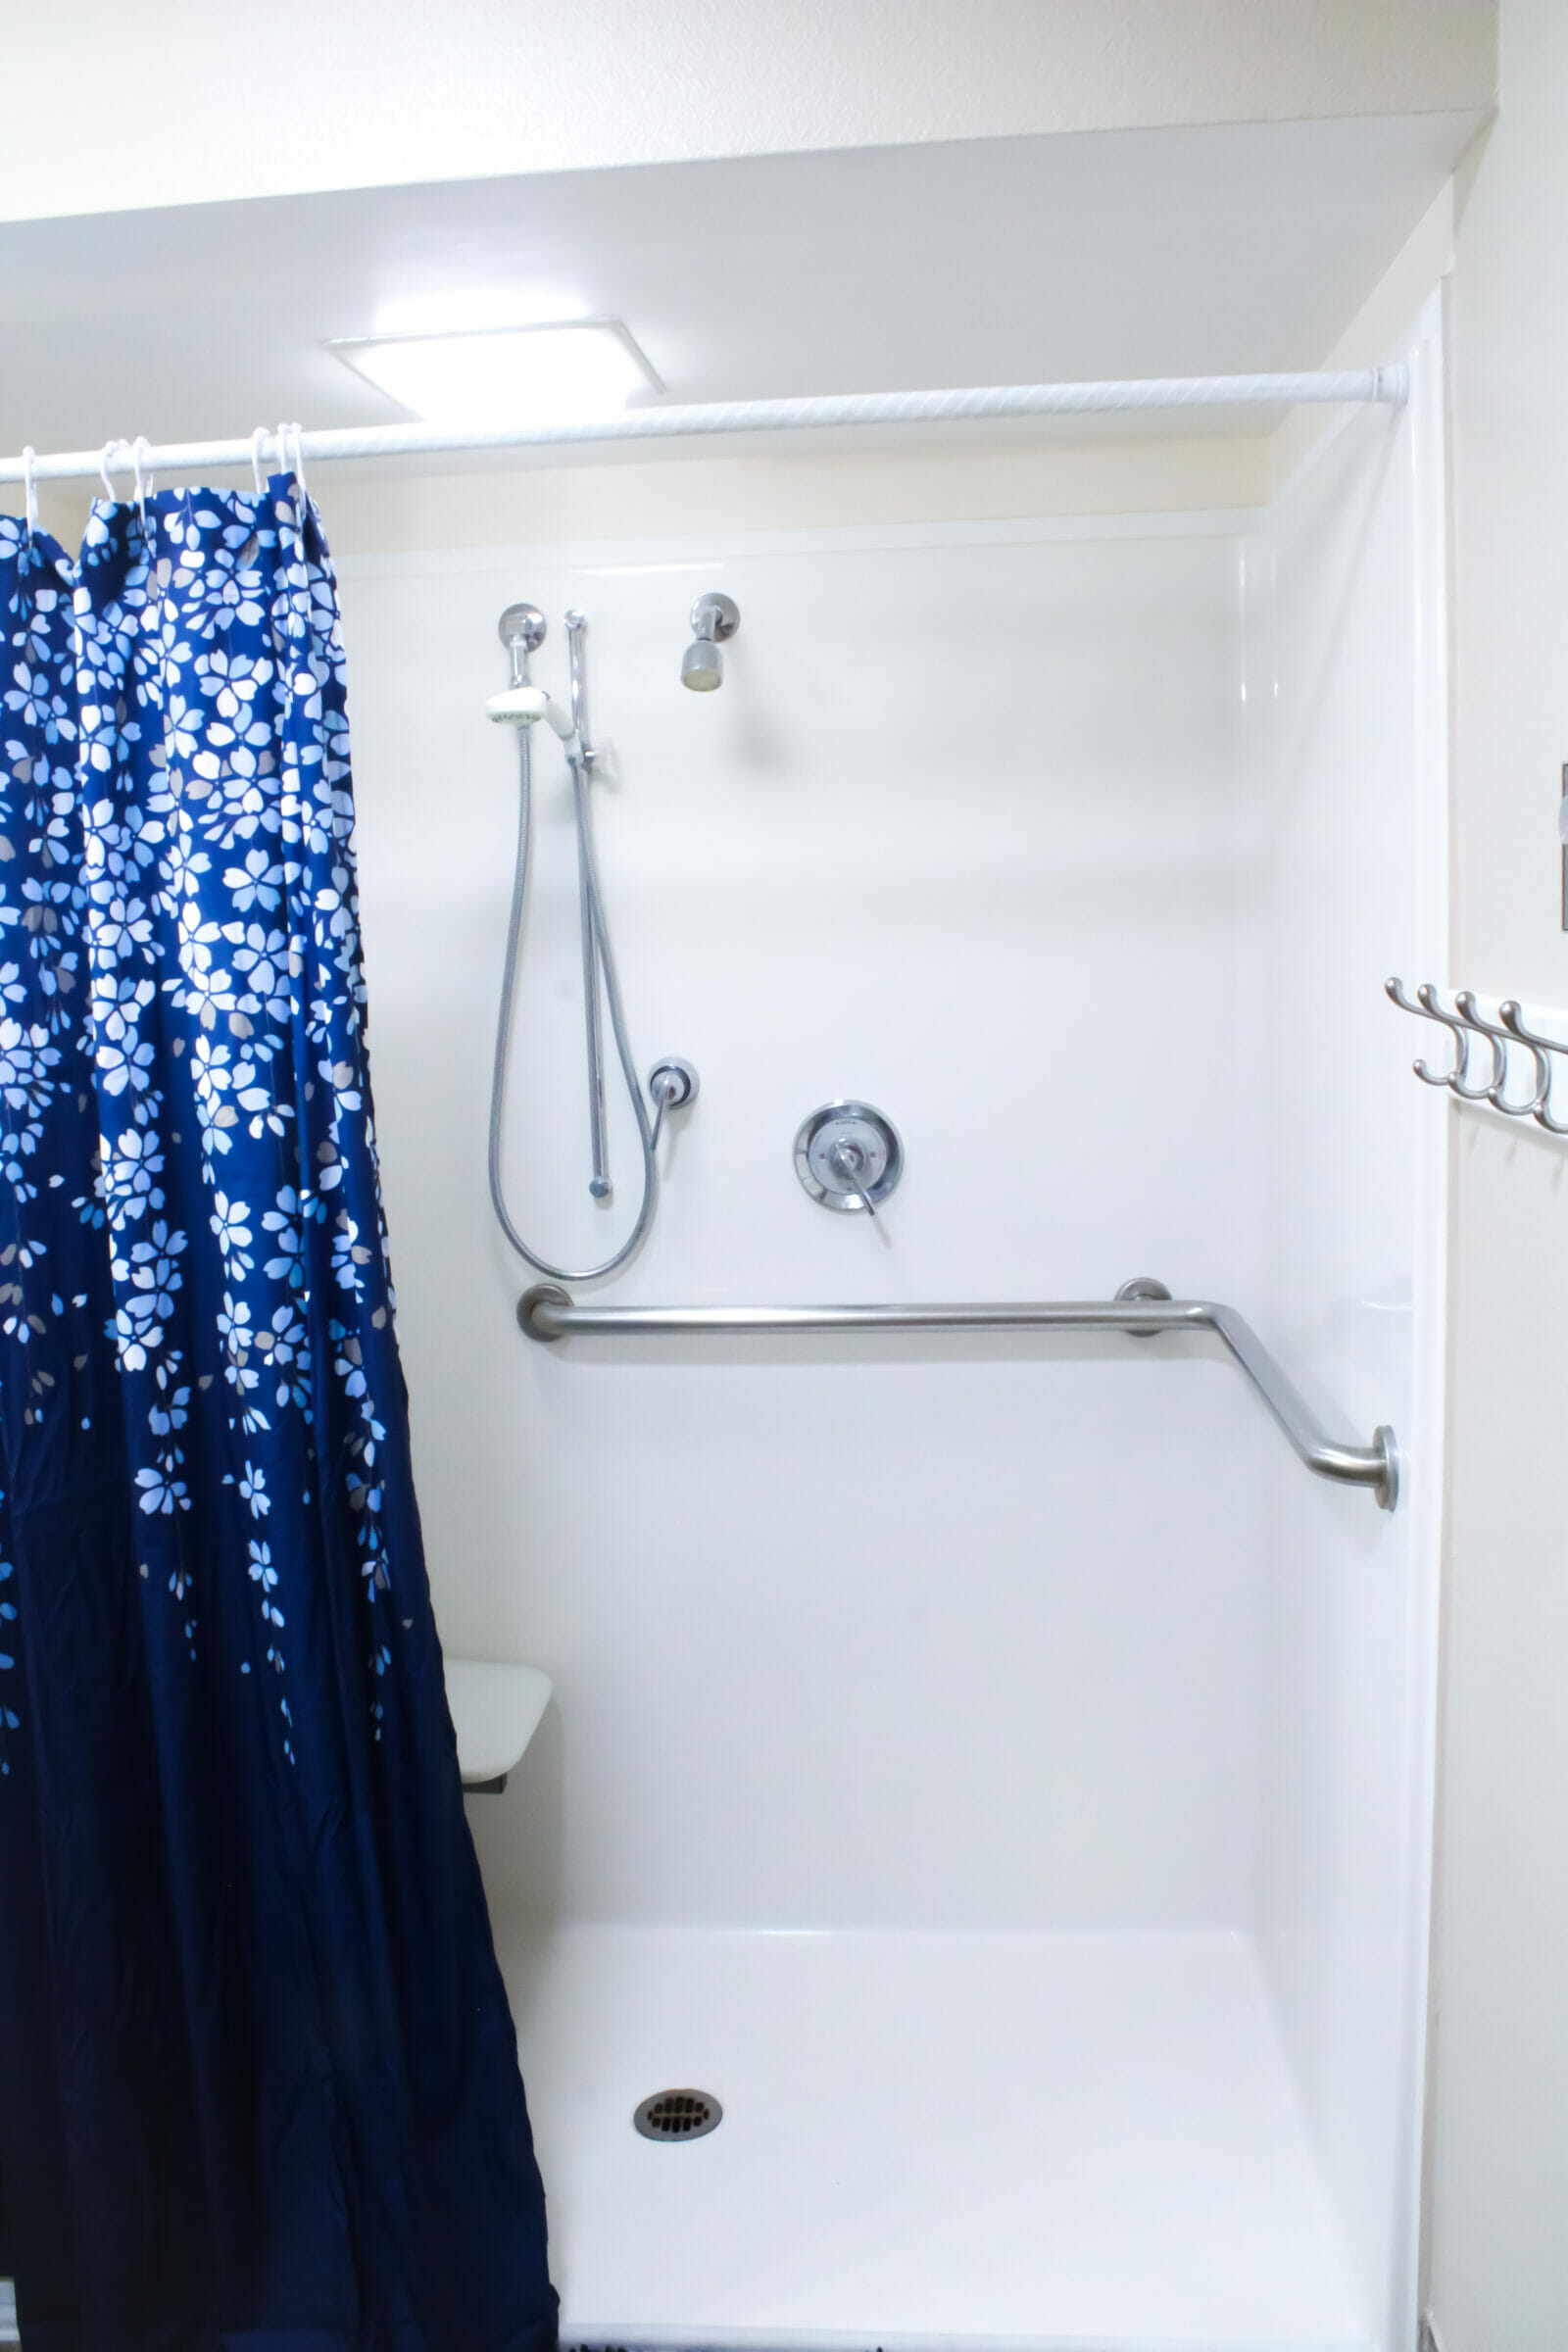 Southgate Senior Living St. George Utah Assisted Living and Memory Care apartment bathroom shower specially designed for seniors